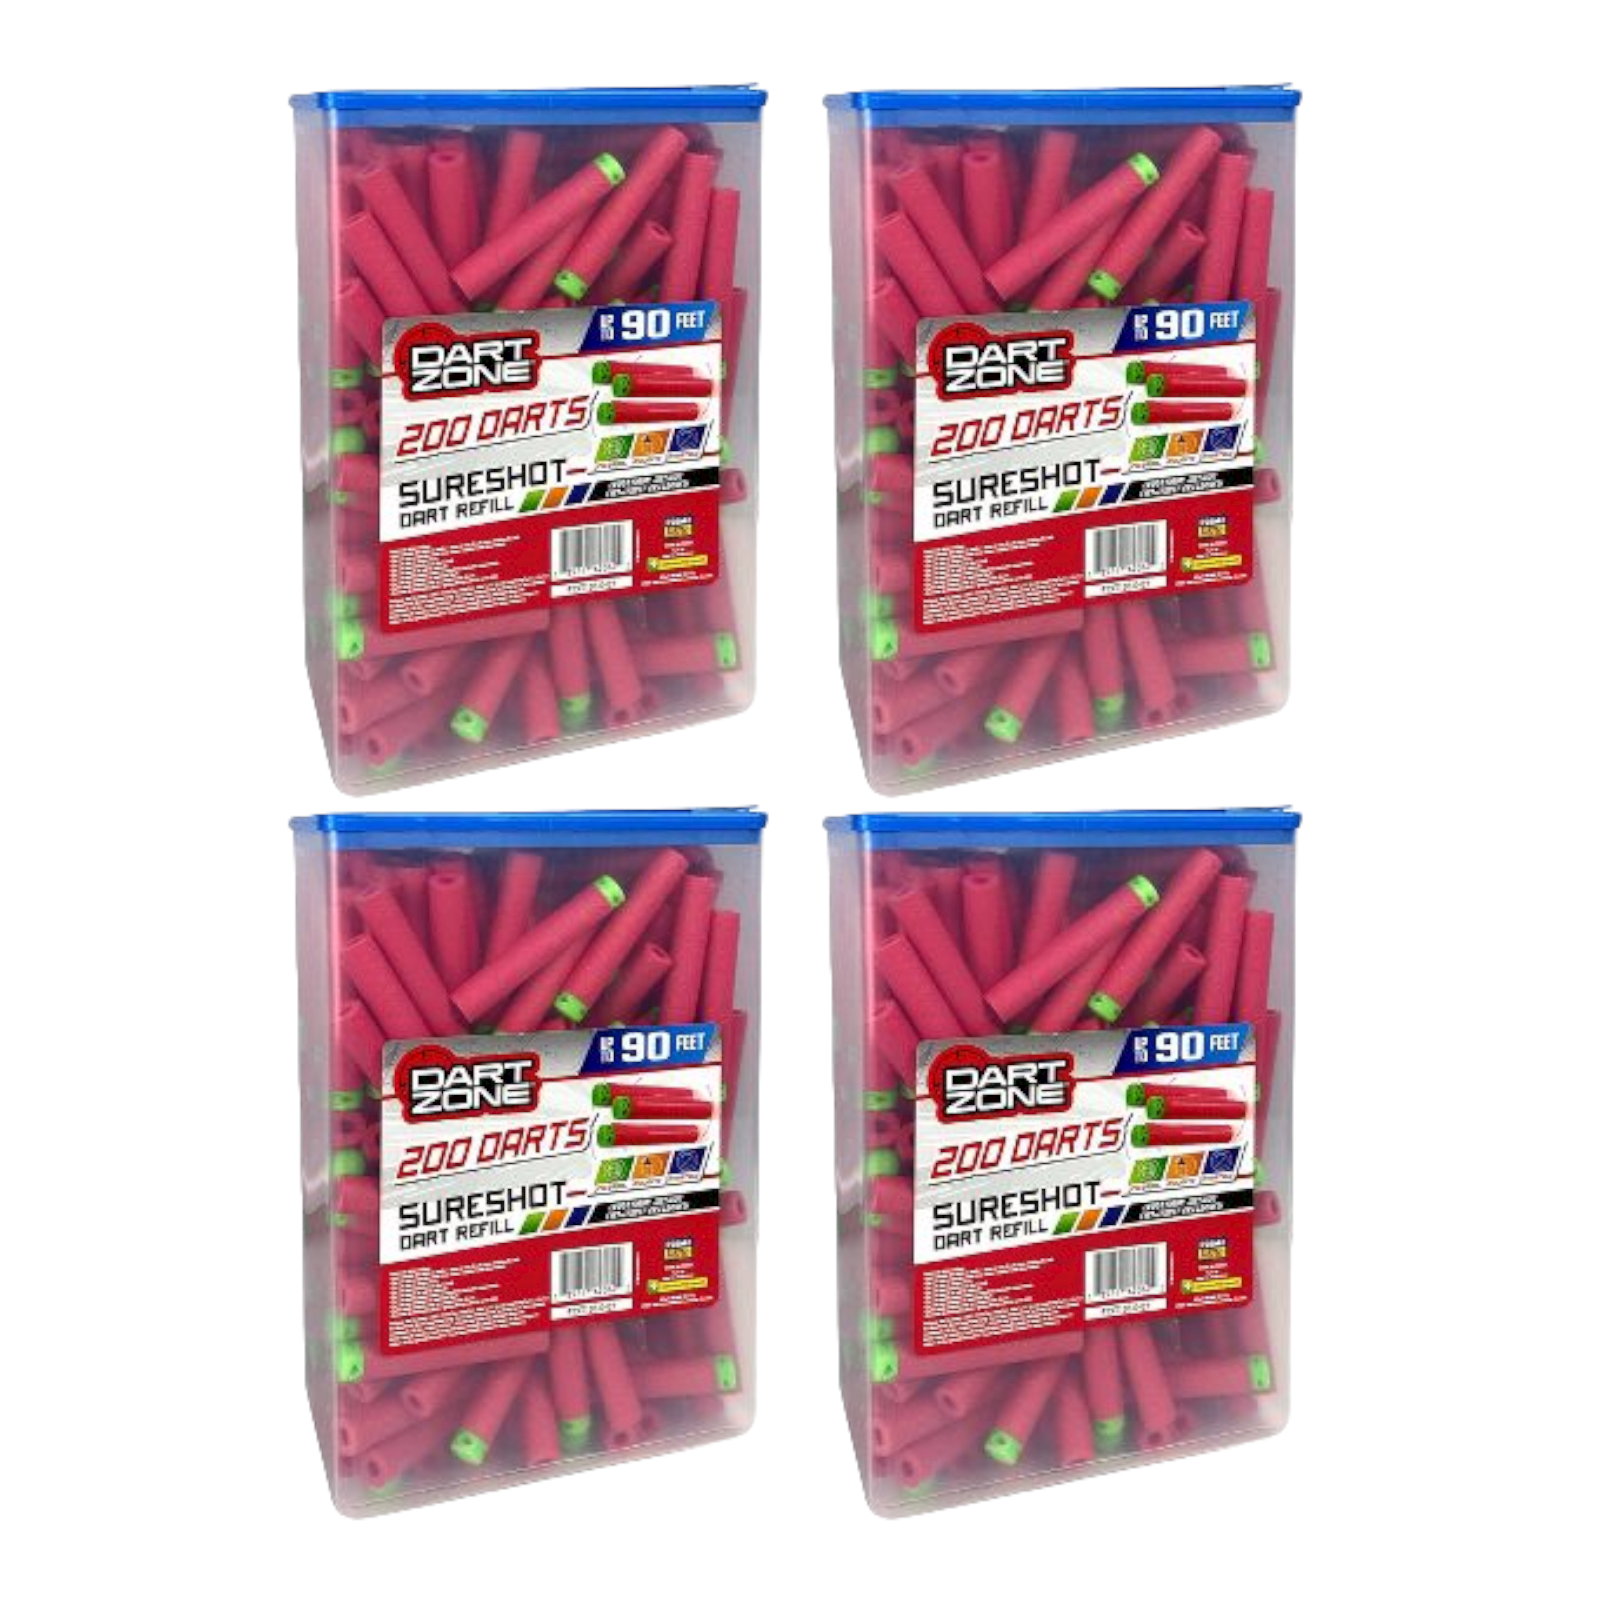 Dart Zone Refill Darts Universal Sureshot Covert Ops 800 Piece Lot Full Length Prime Time Toys